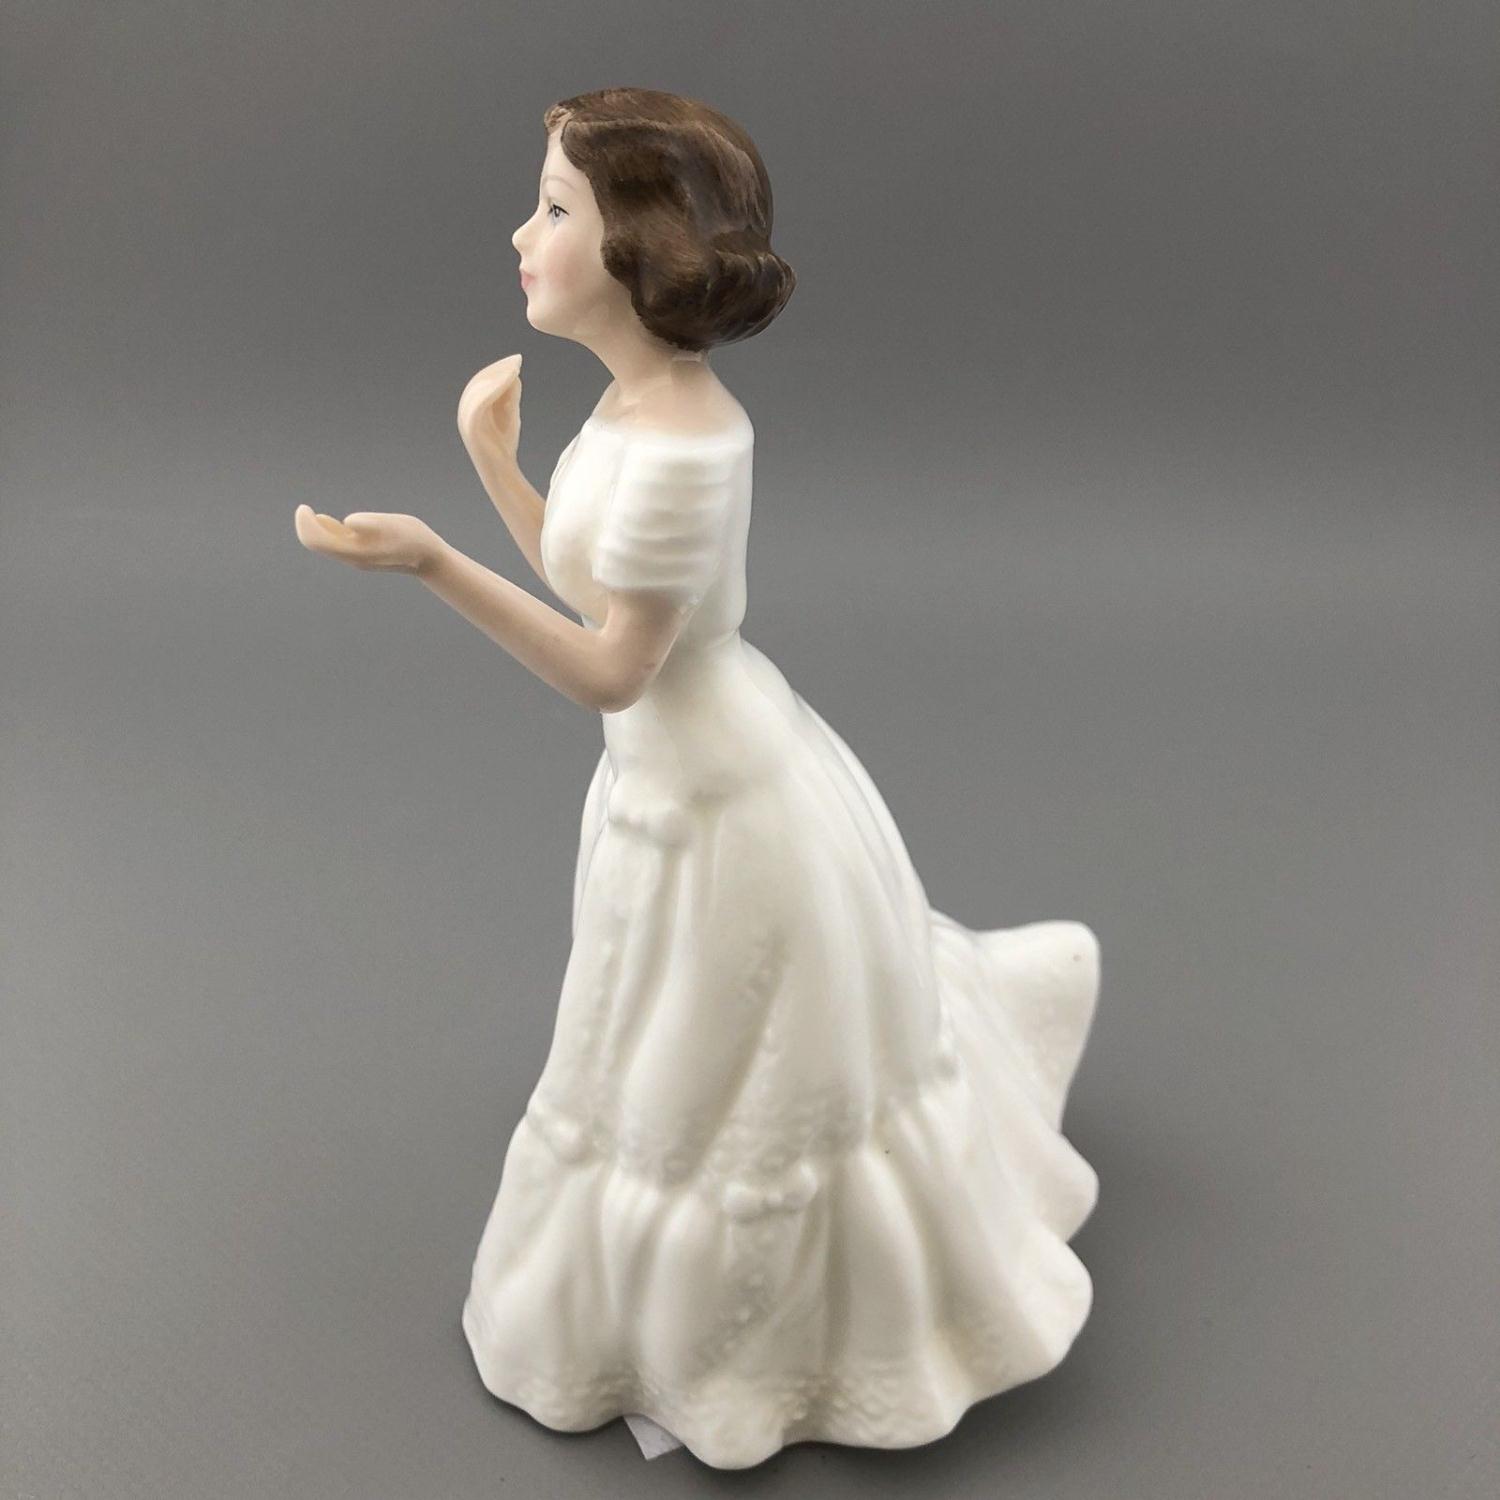 Royal Doulton Figurine "Welcome" Collectors Club HN3764 - Nada M Pedley 1995 - Image 5 of 6